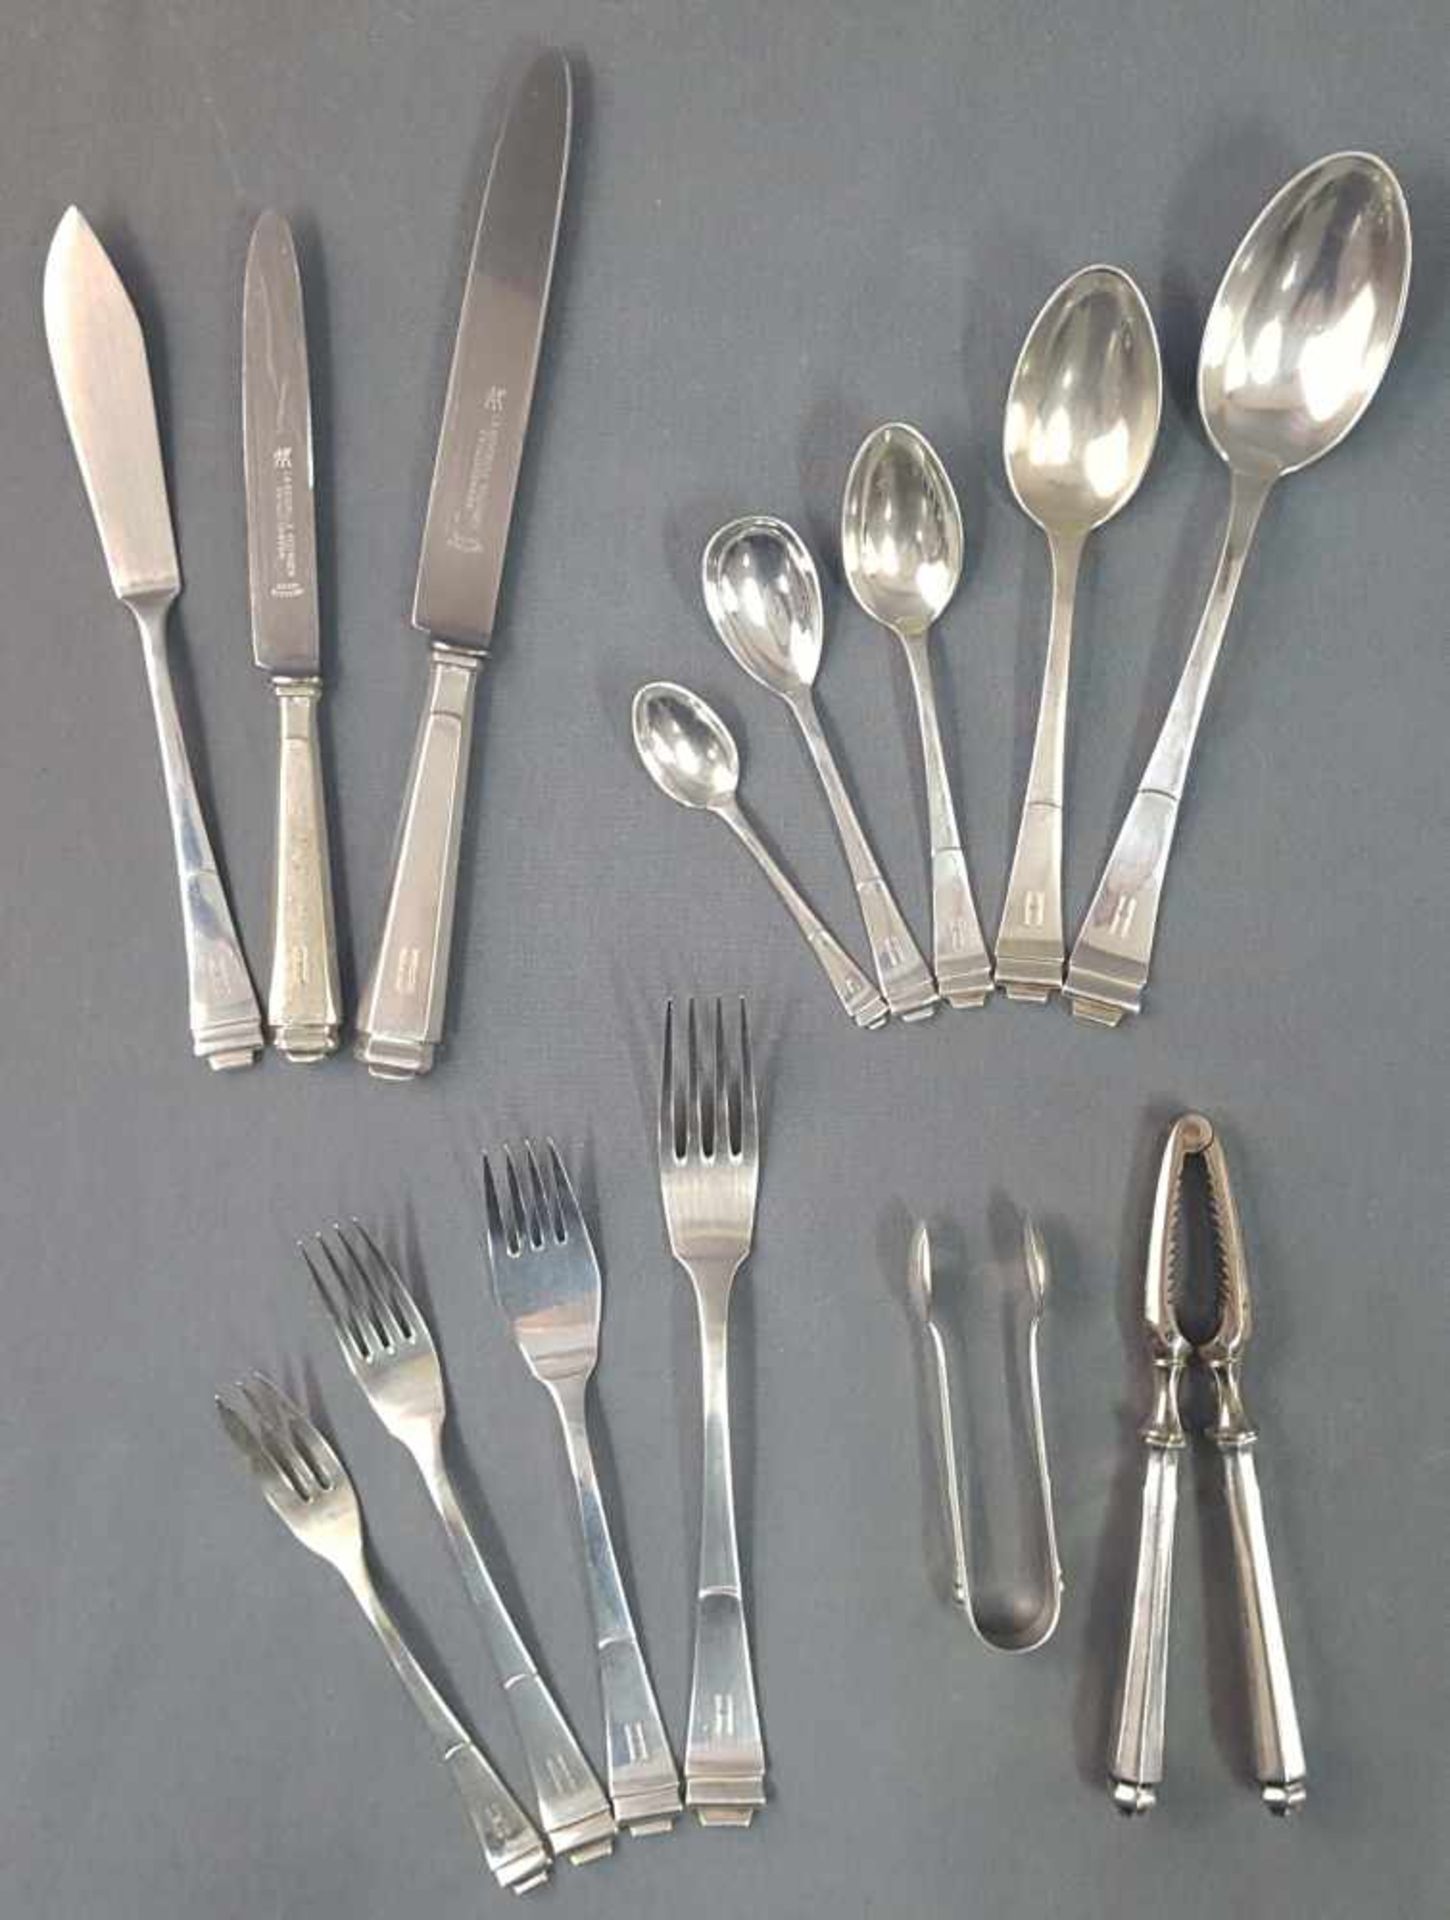 Wilkens "Pagode" silver 800, Art Deco cutlery. - Image 6 of 8